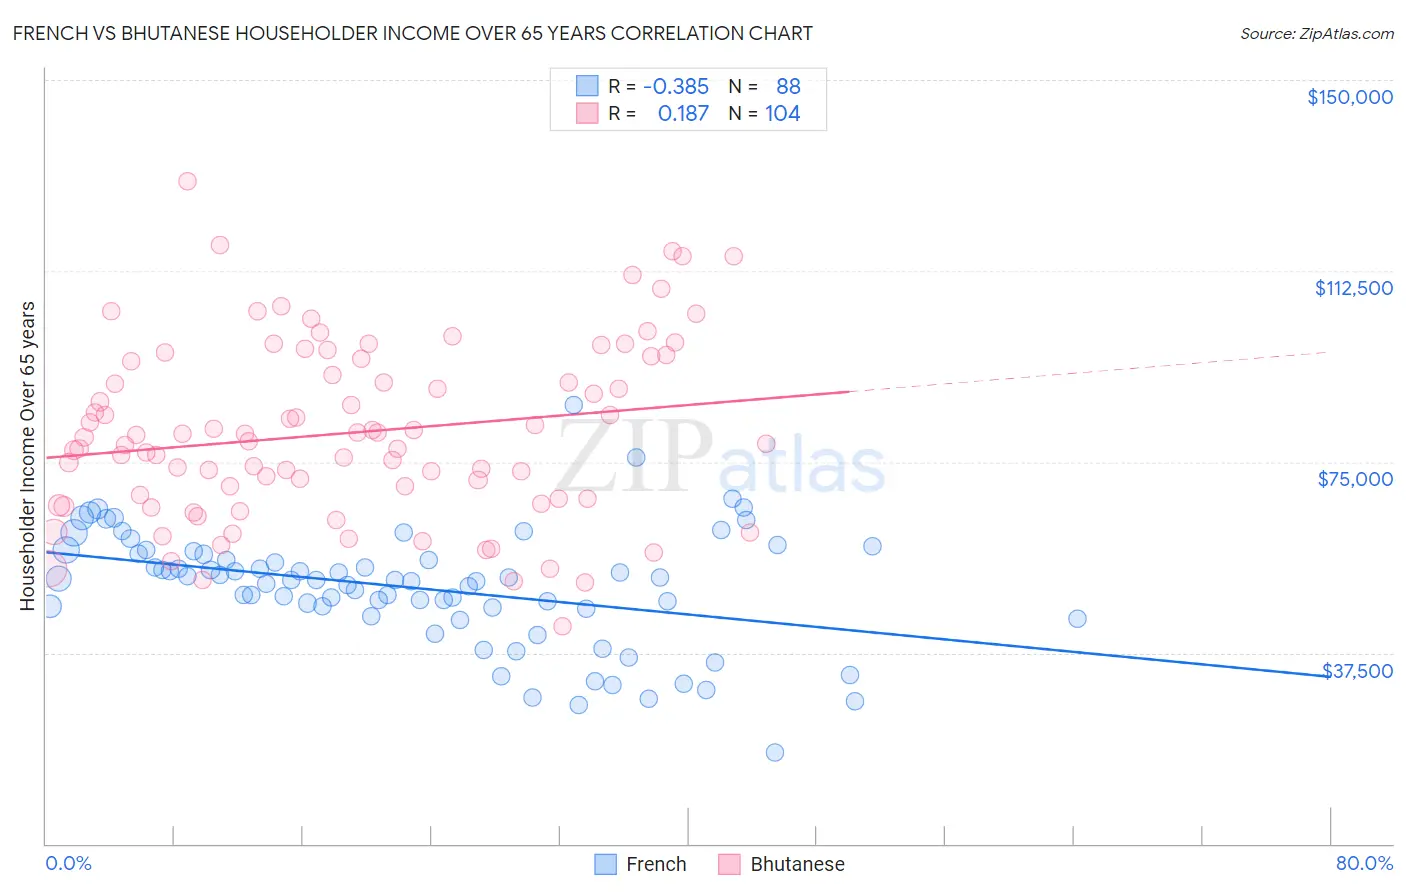 French vs Bhutanese Householder Income Over 65 years